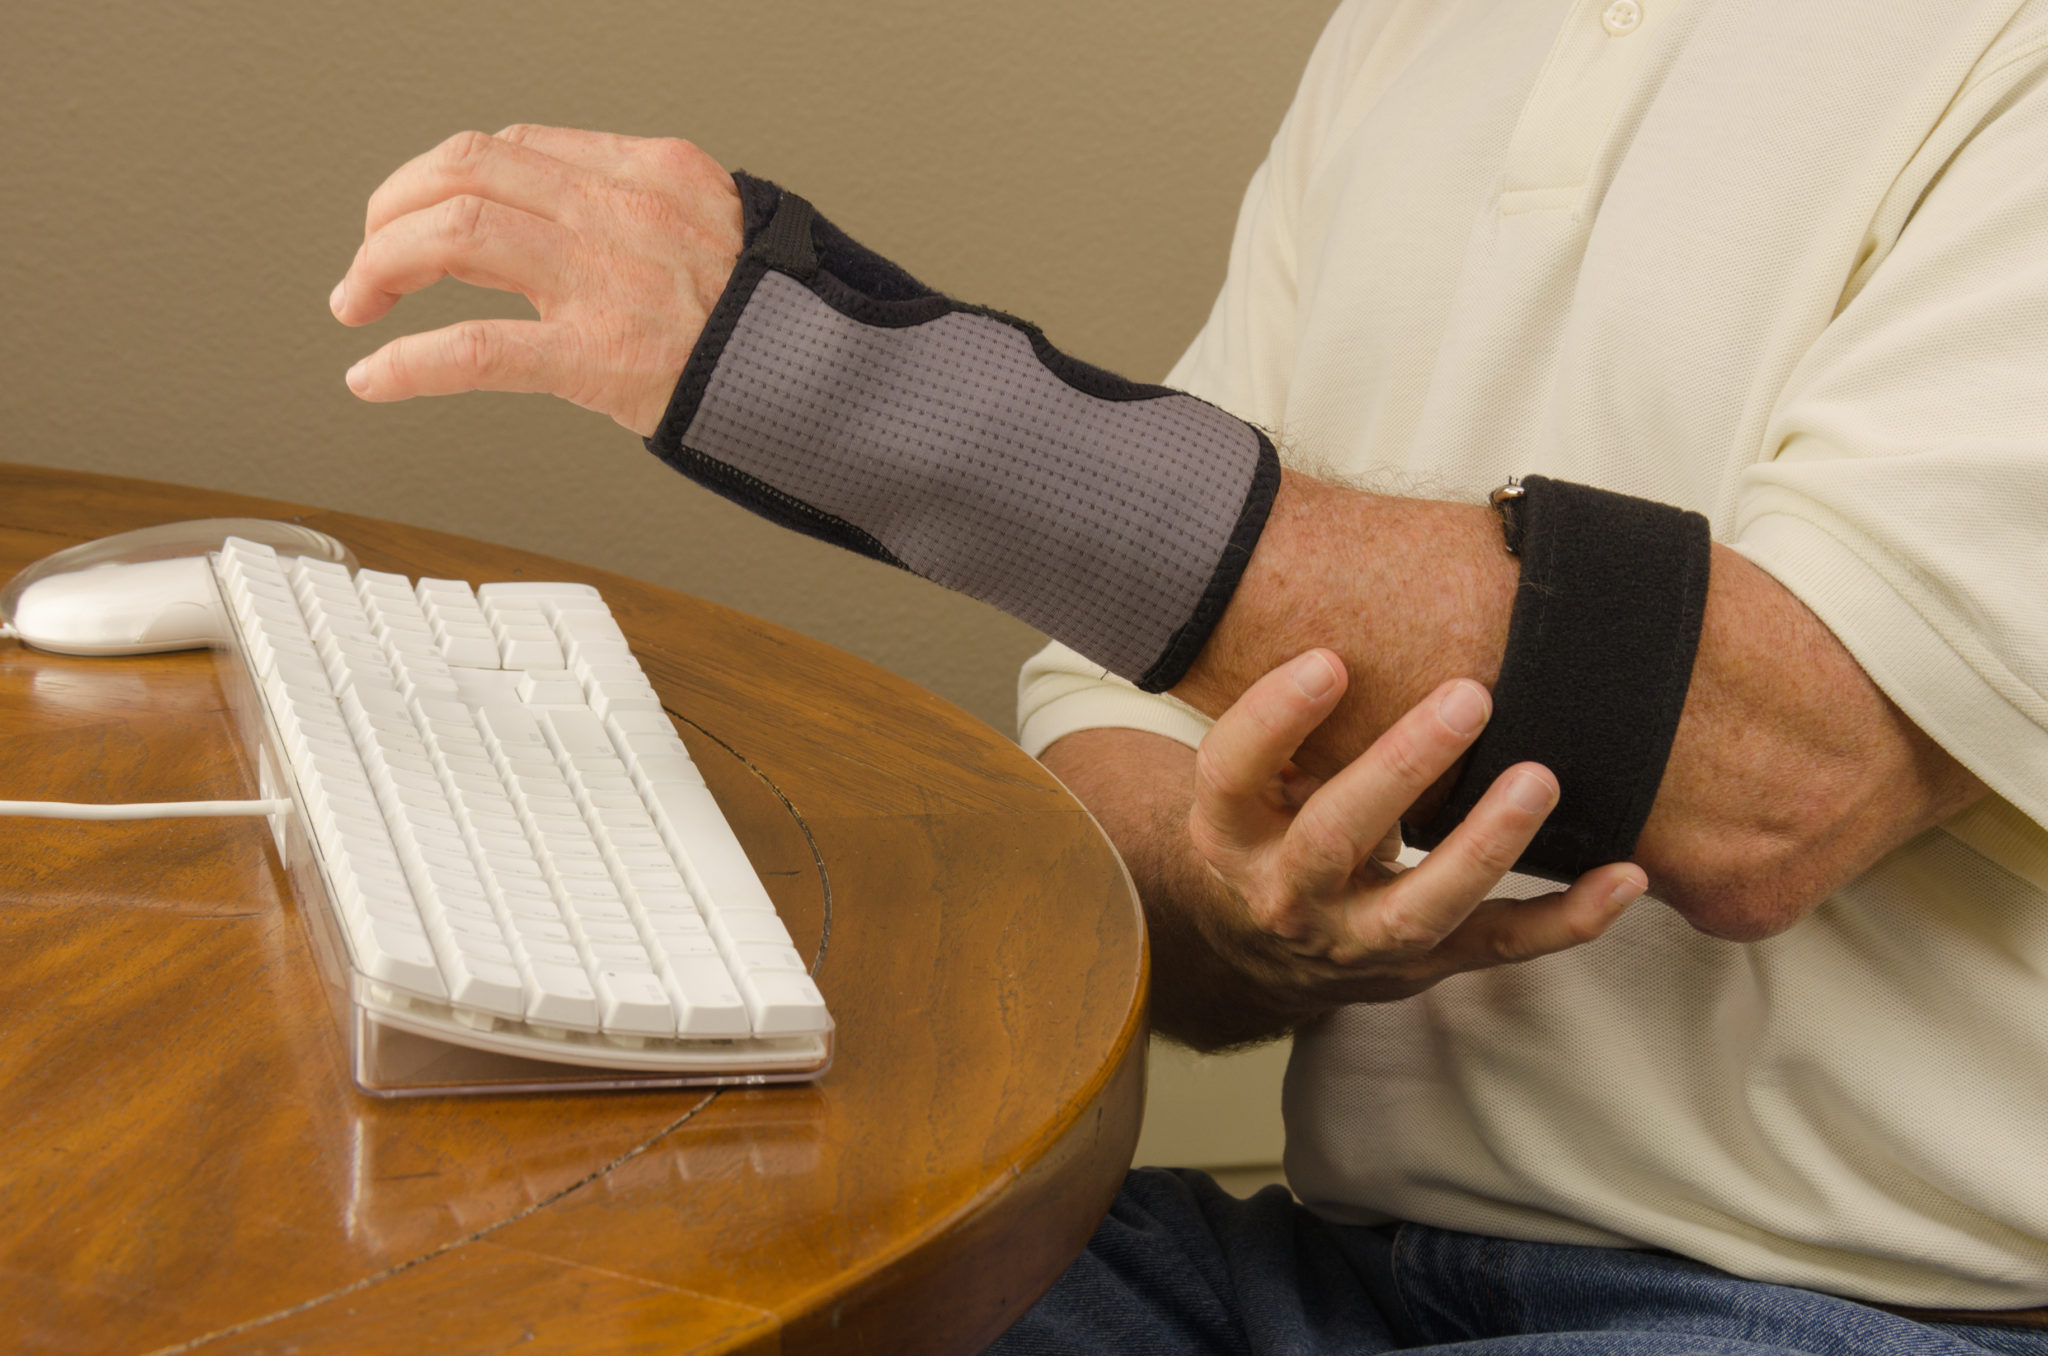 A man is experiencing computer use pain with tendinitis, carpal tunnel syndrome and repetitive stress injury very common to people who work on computers all day. These issues also affect athletes, mechanics and many other professions that require the same arm movement over and over.